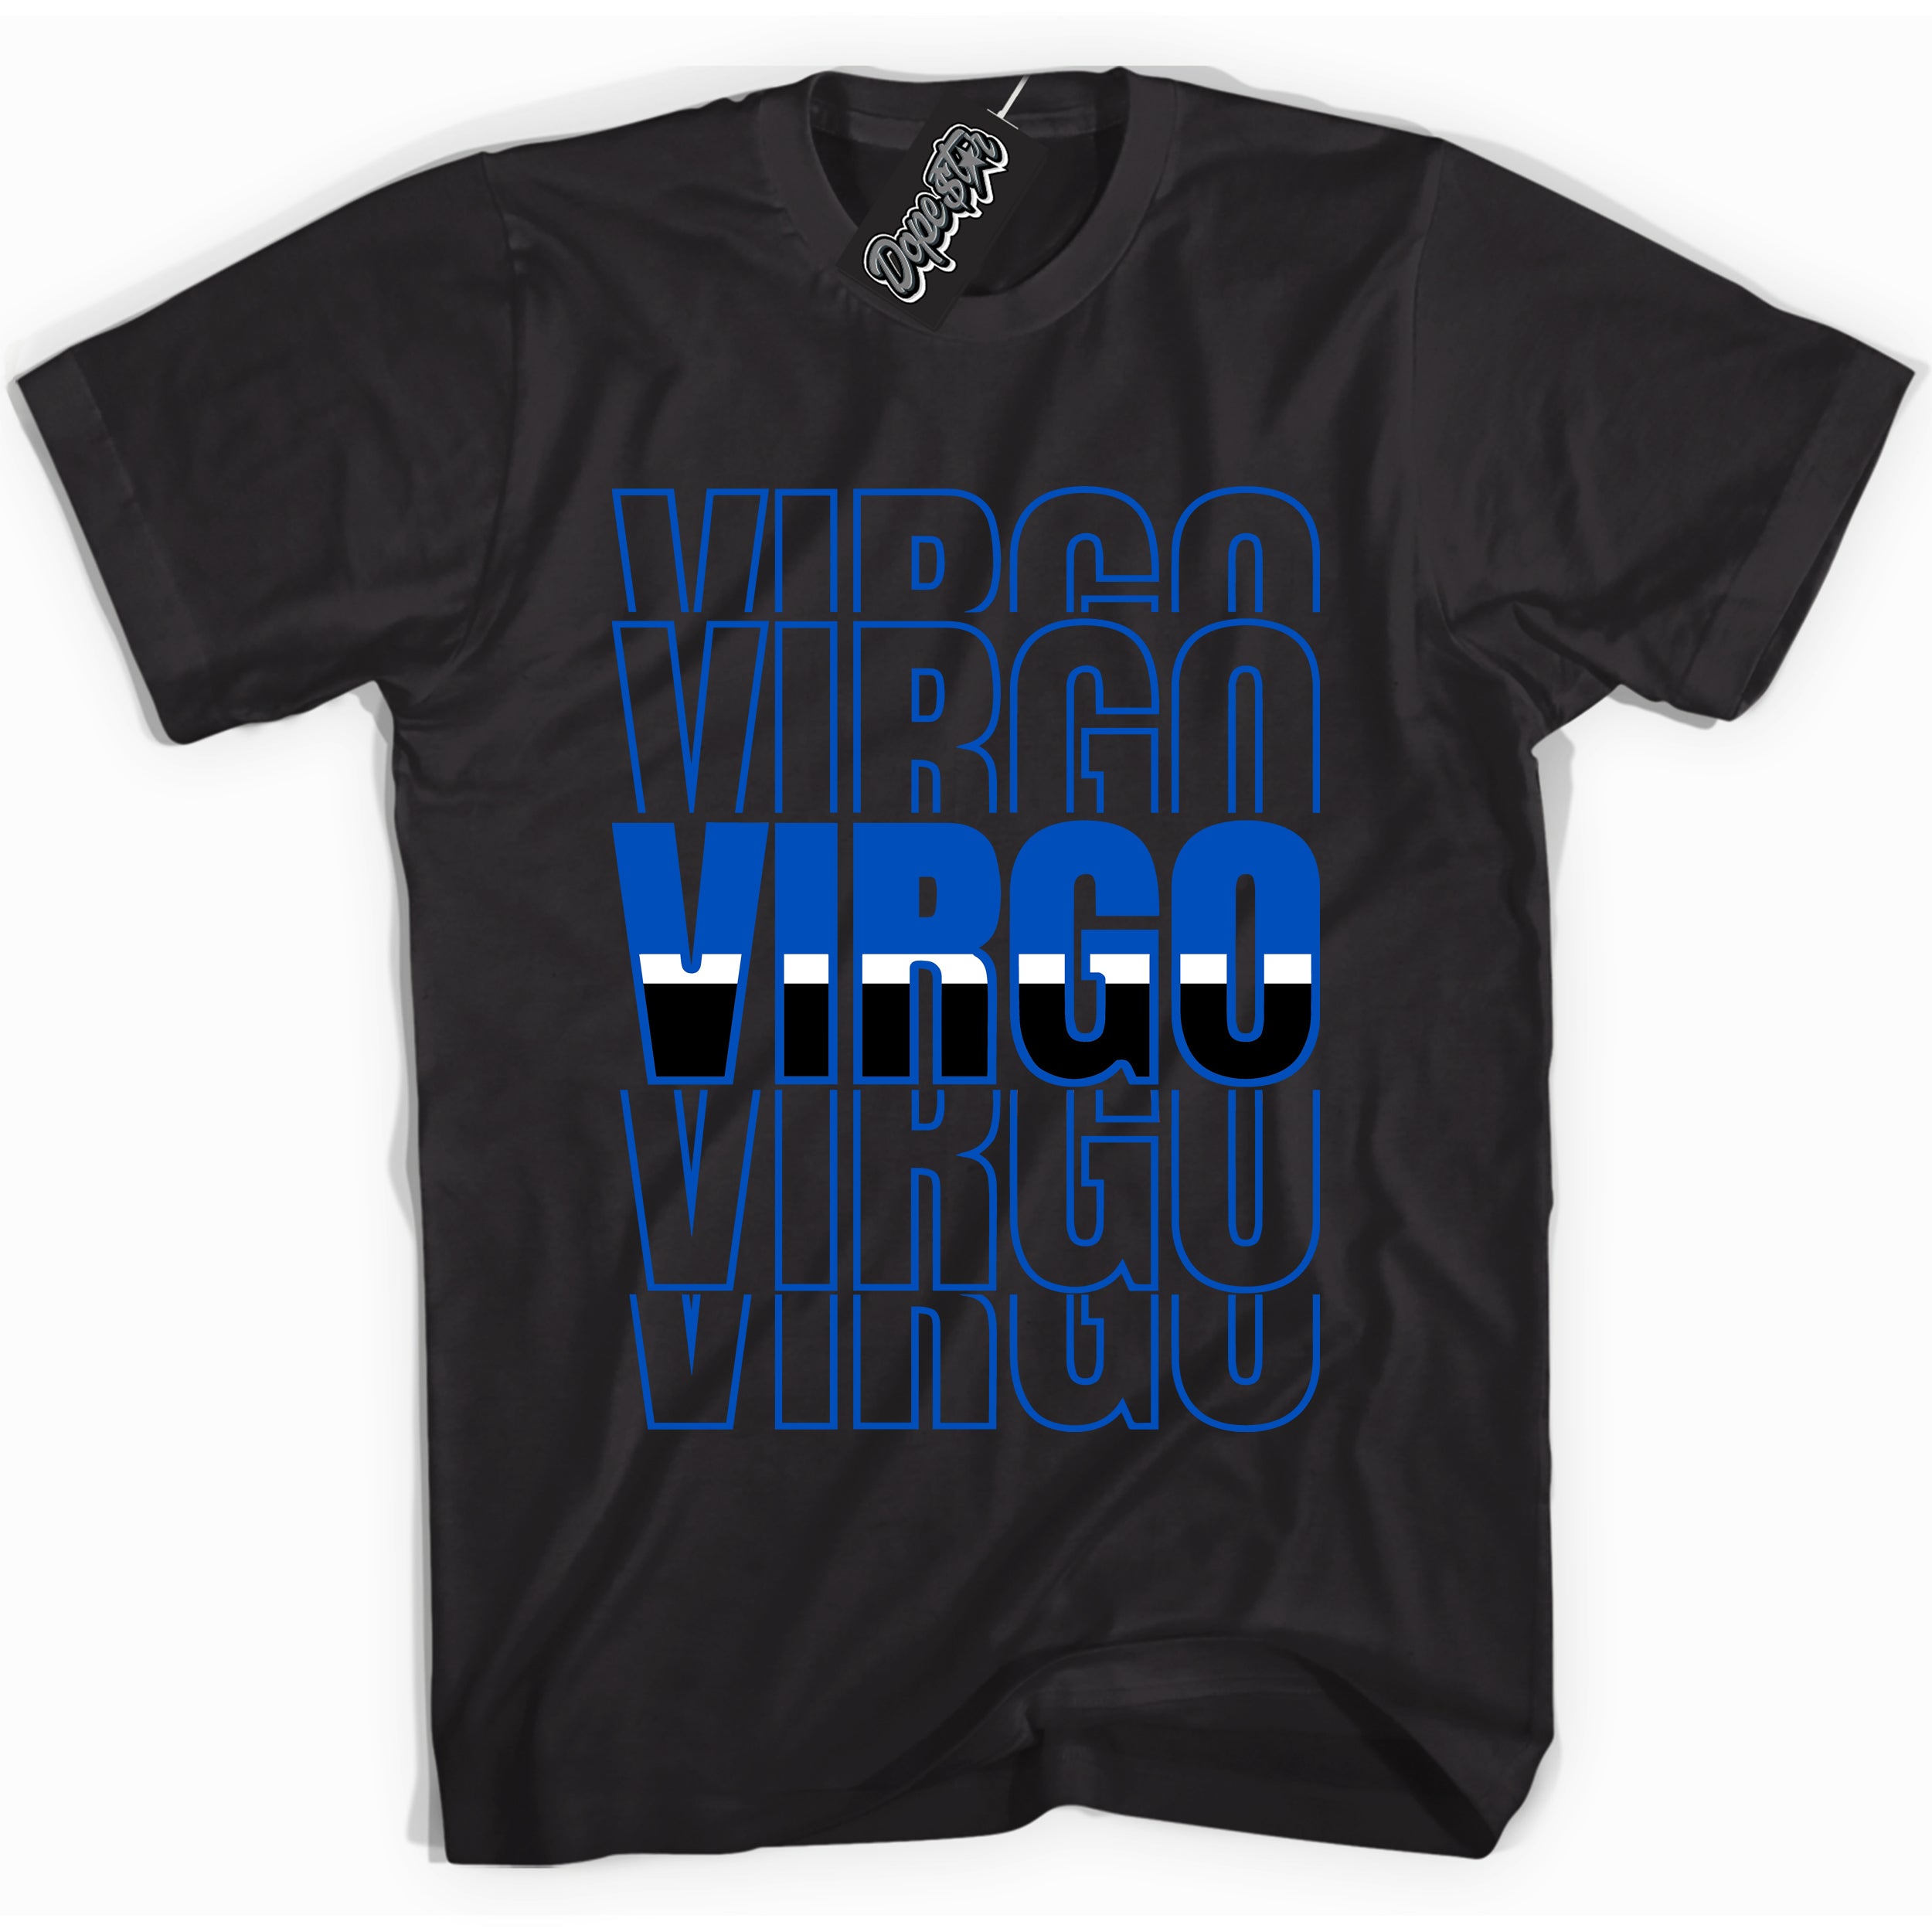 Cool Black graphic tee with "Virgo" design, that perfectly matches Royal Reimagined 1s sneakers 